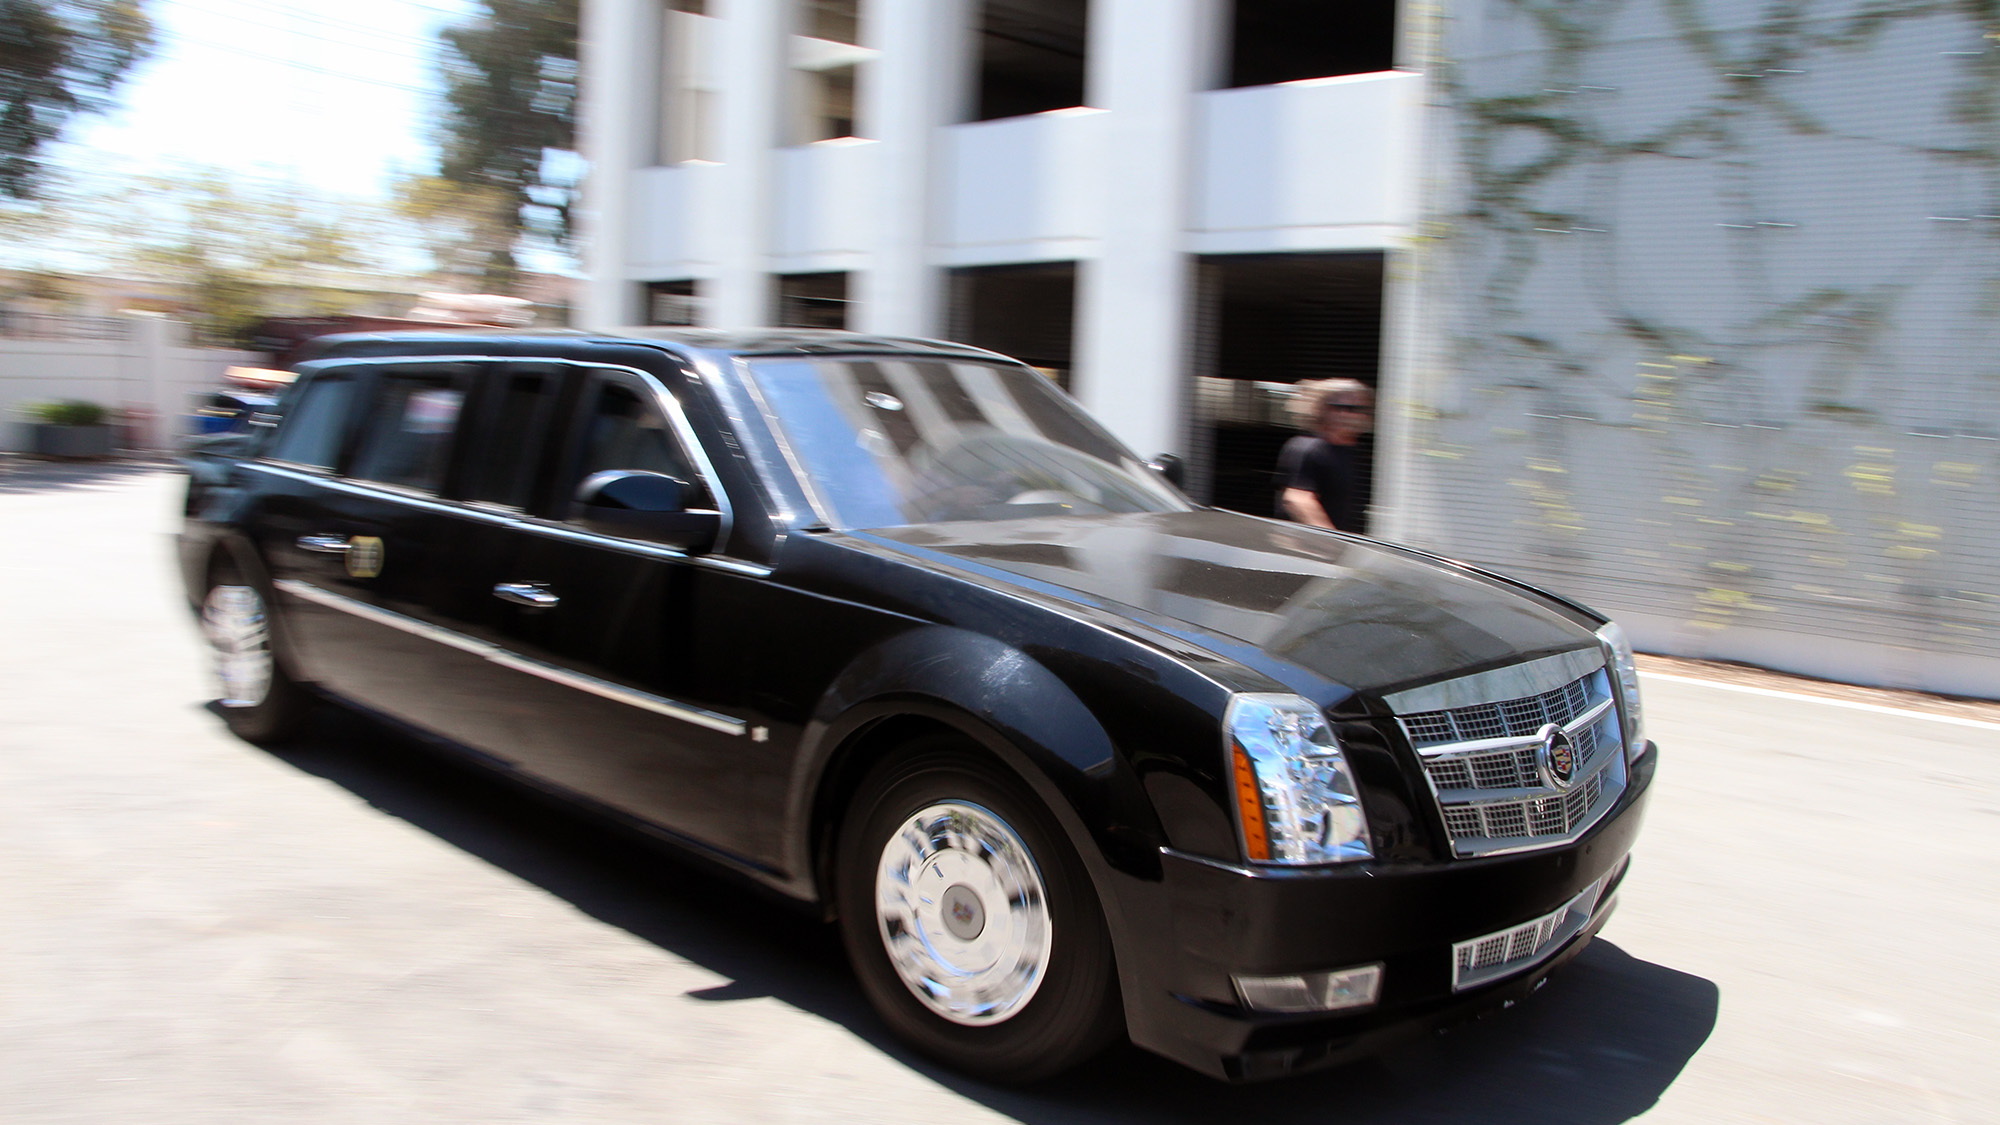 The Beast Presidential Limo from White House Down